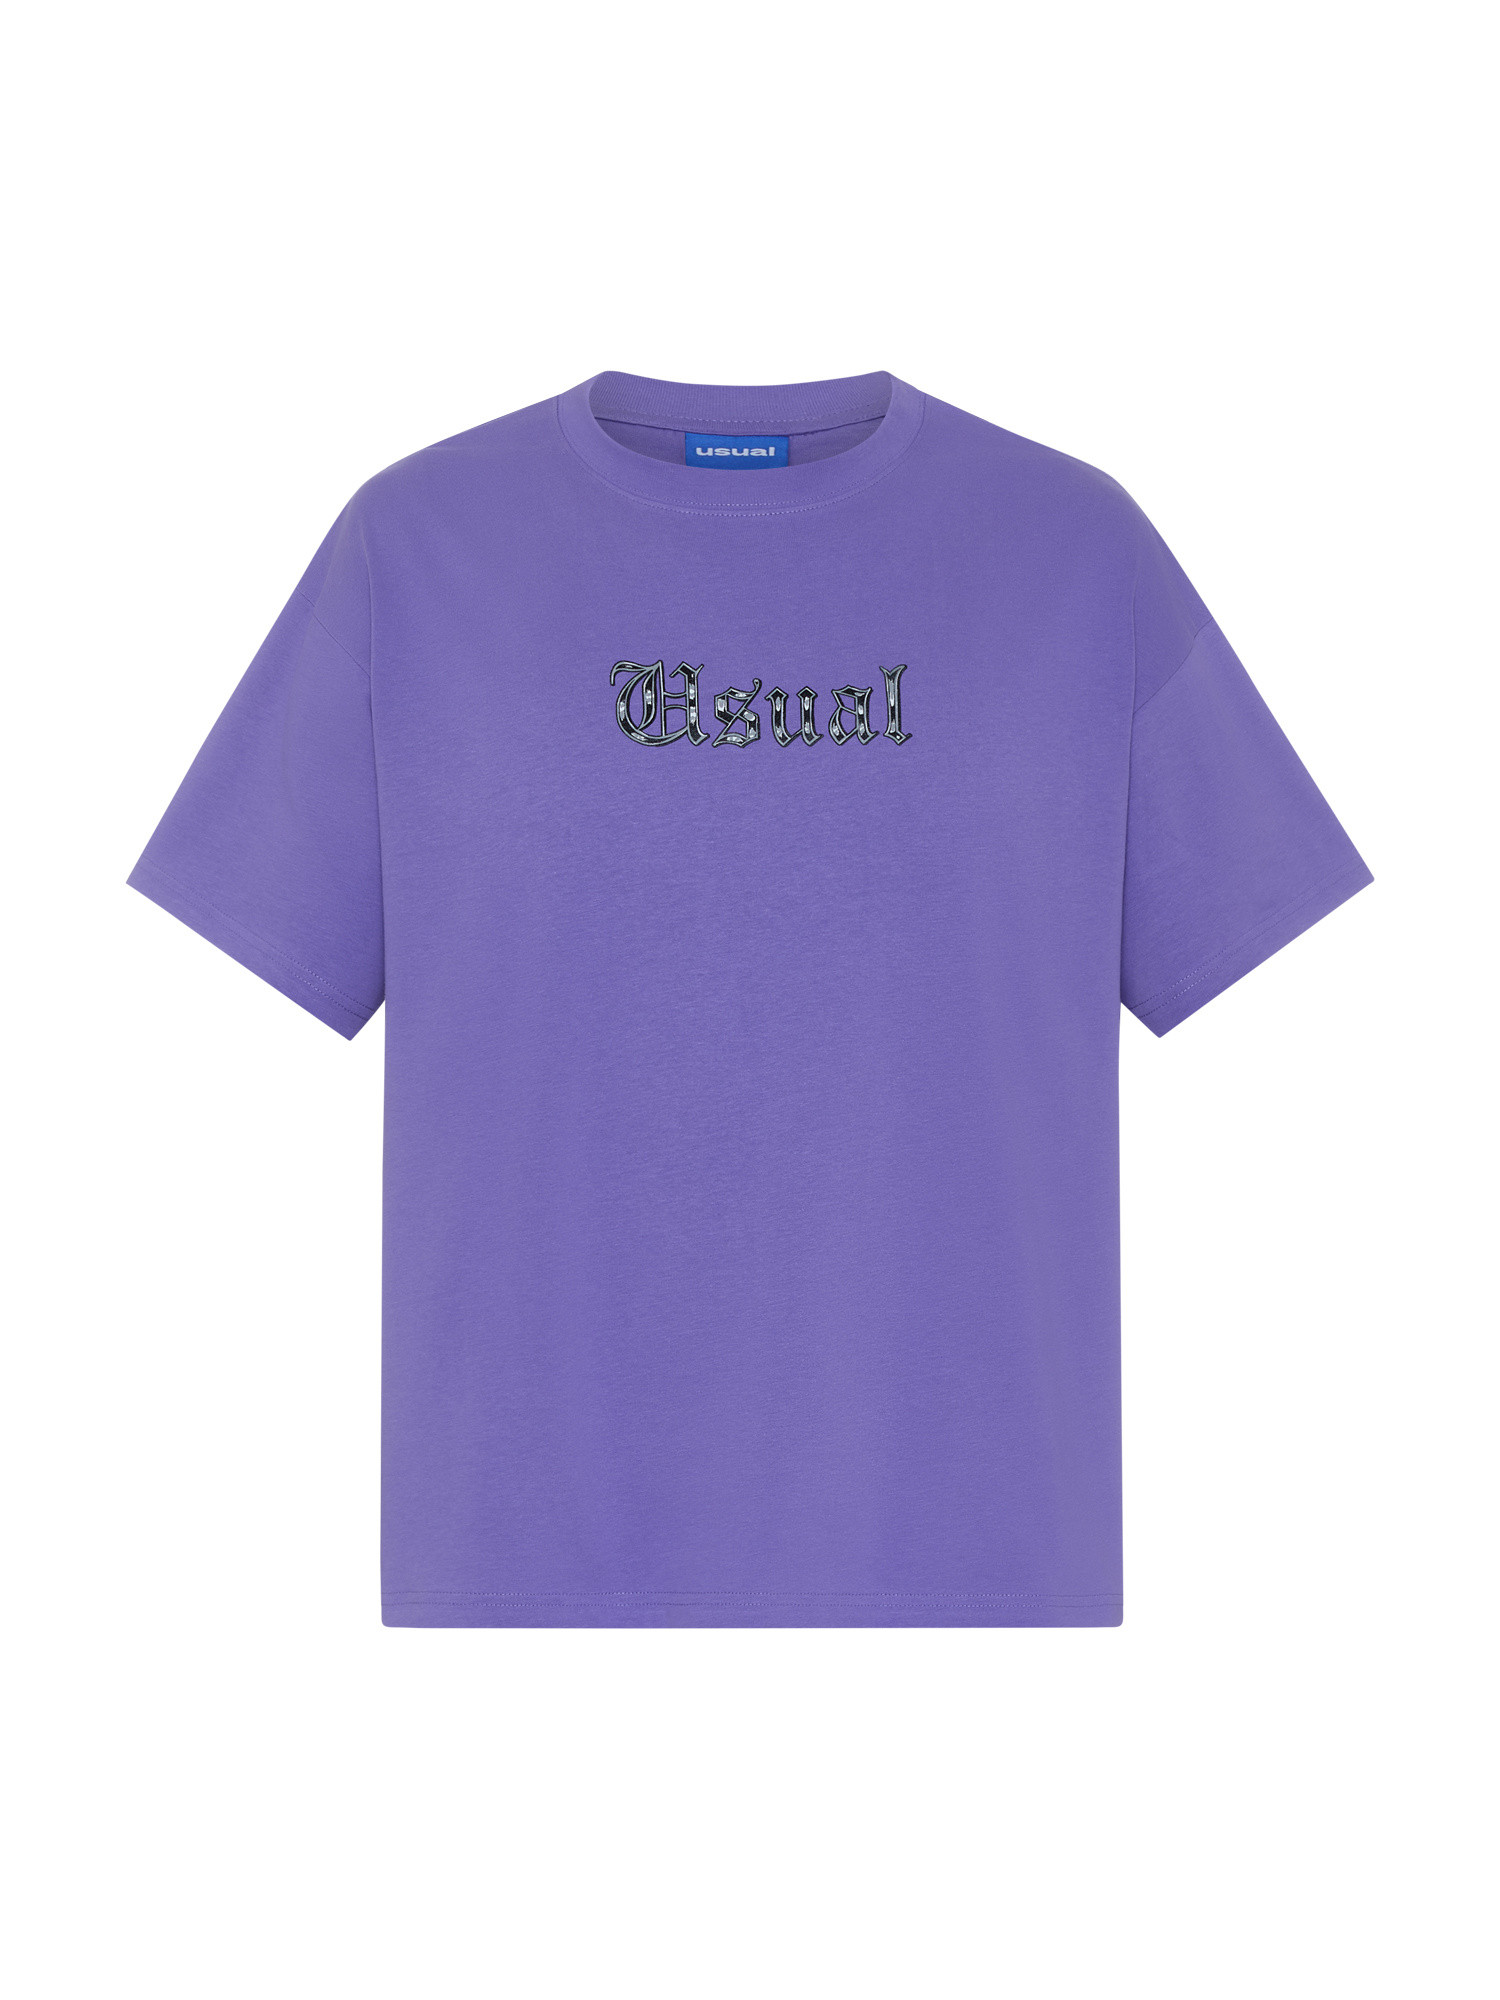 Usual - Barrio T-Shirt, Purple, large image number 0